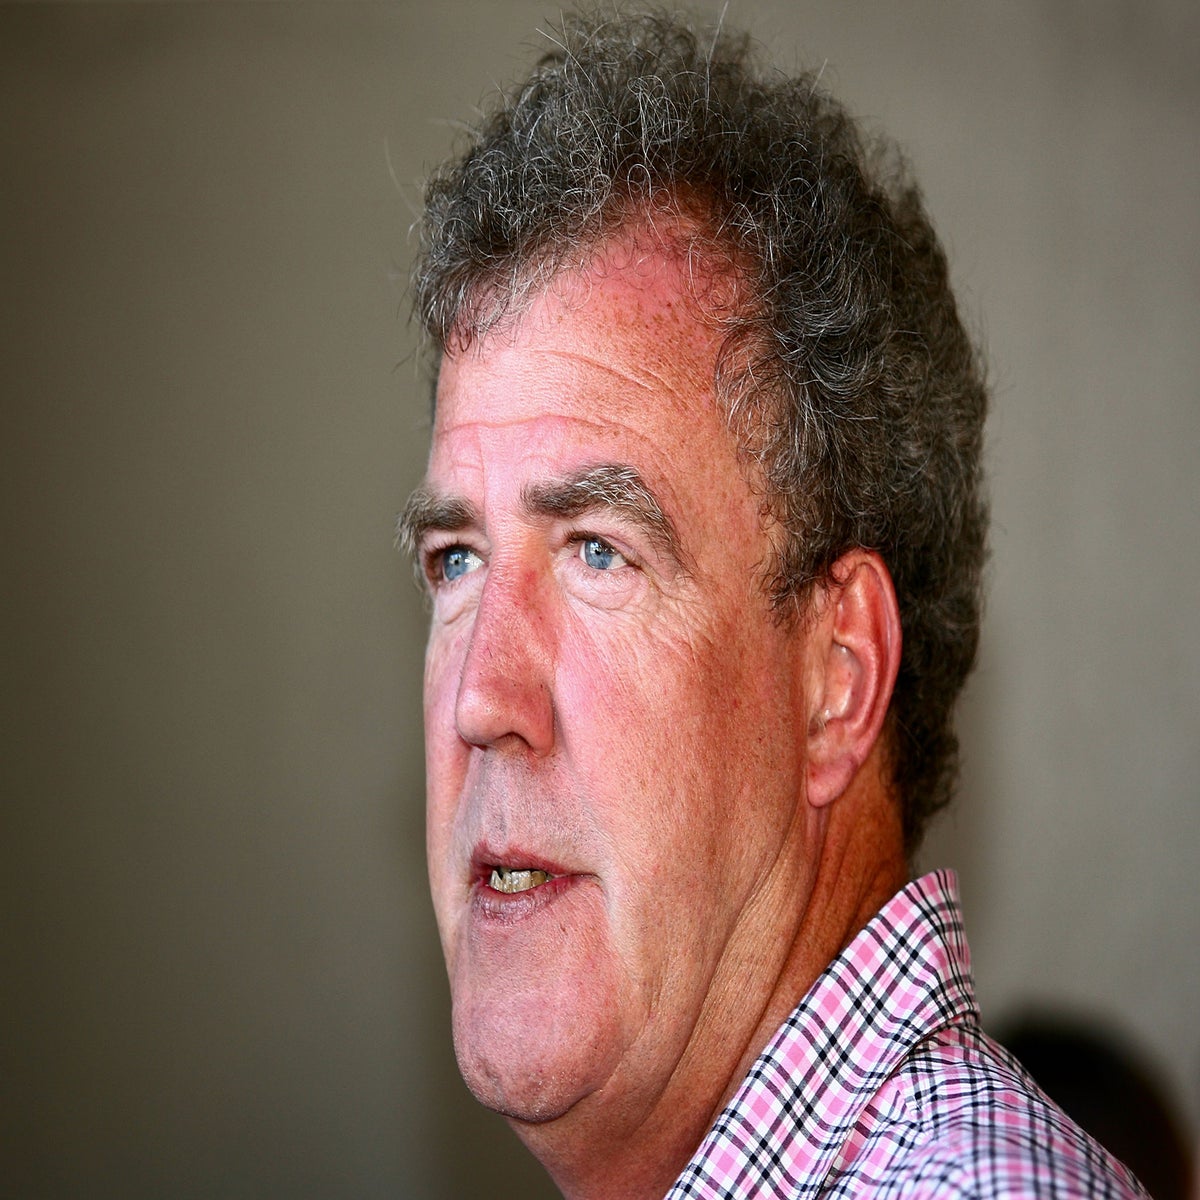 Jeremy Clarkson Just Took His Last Ever Lap Around the Top Gear